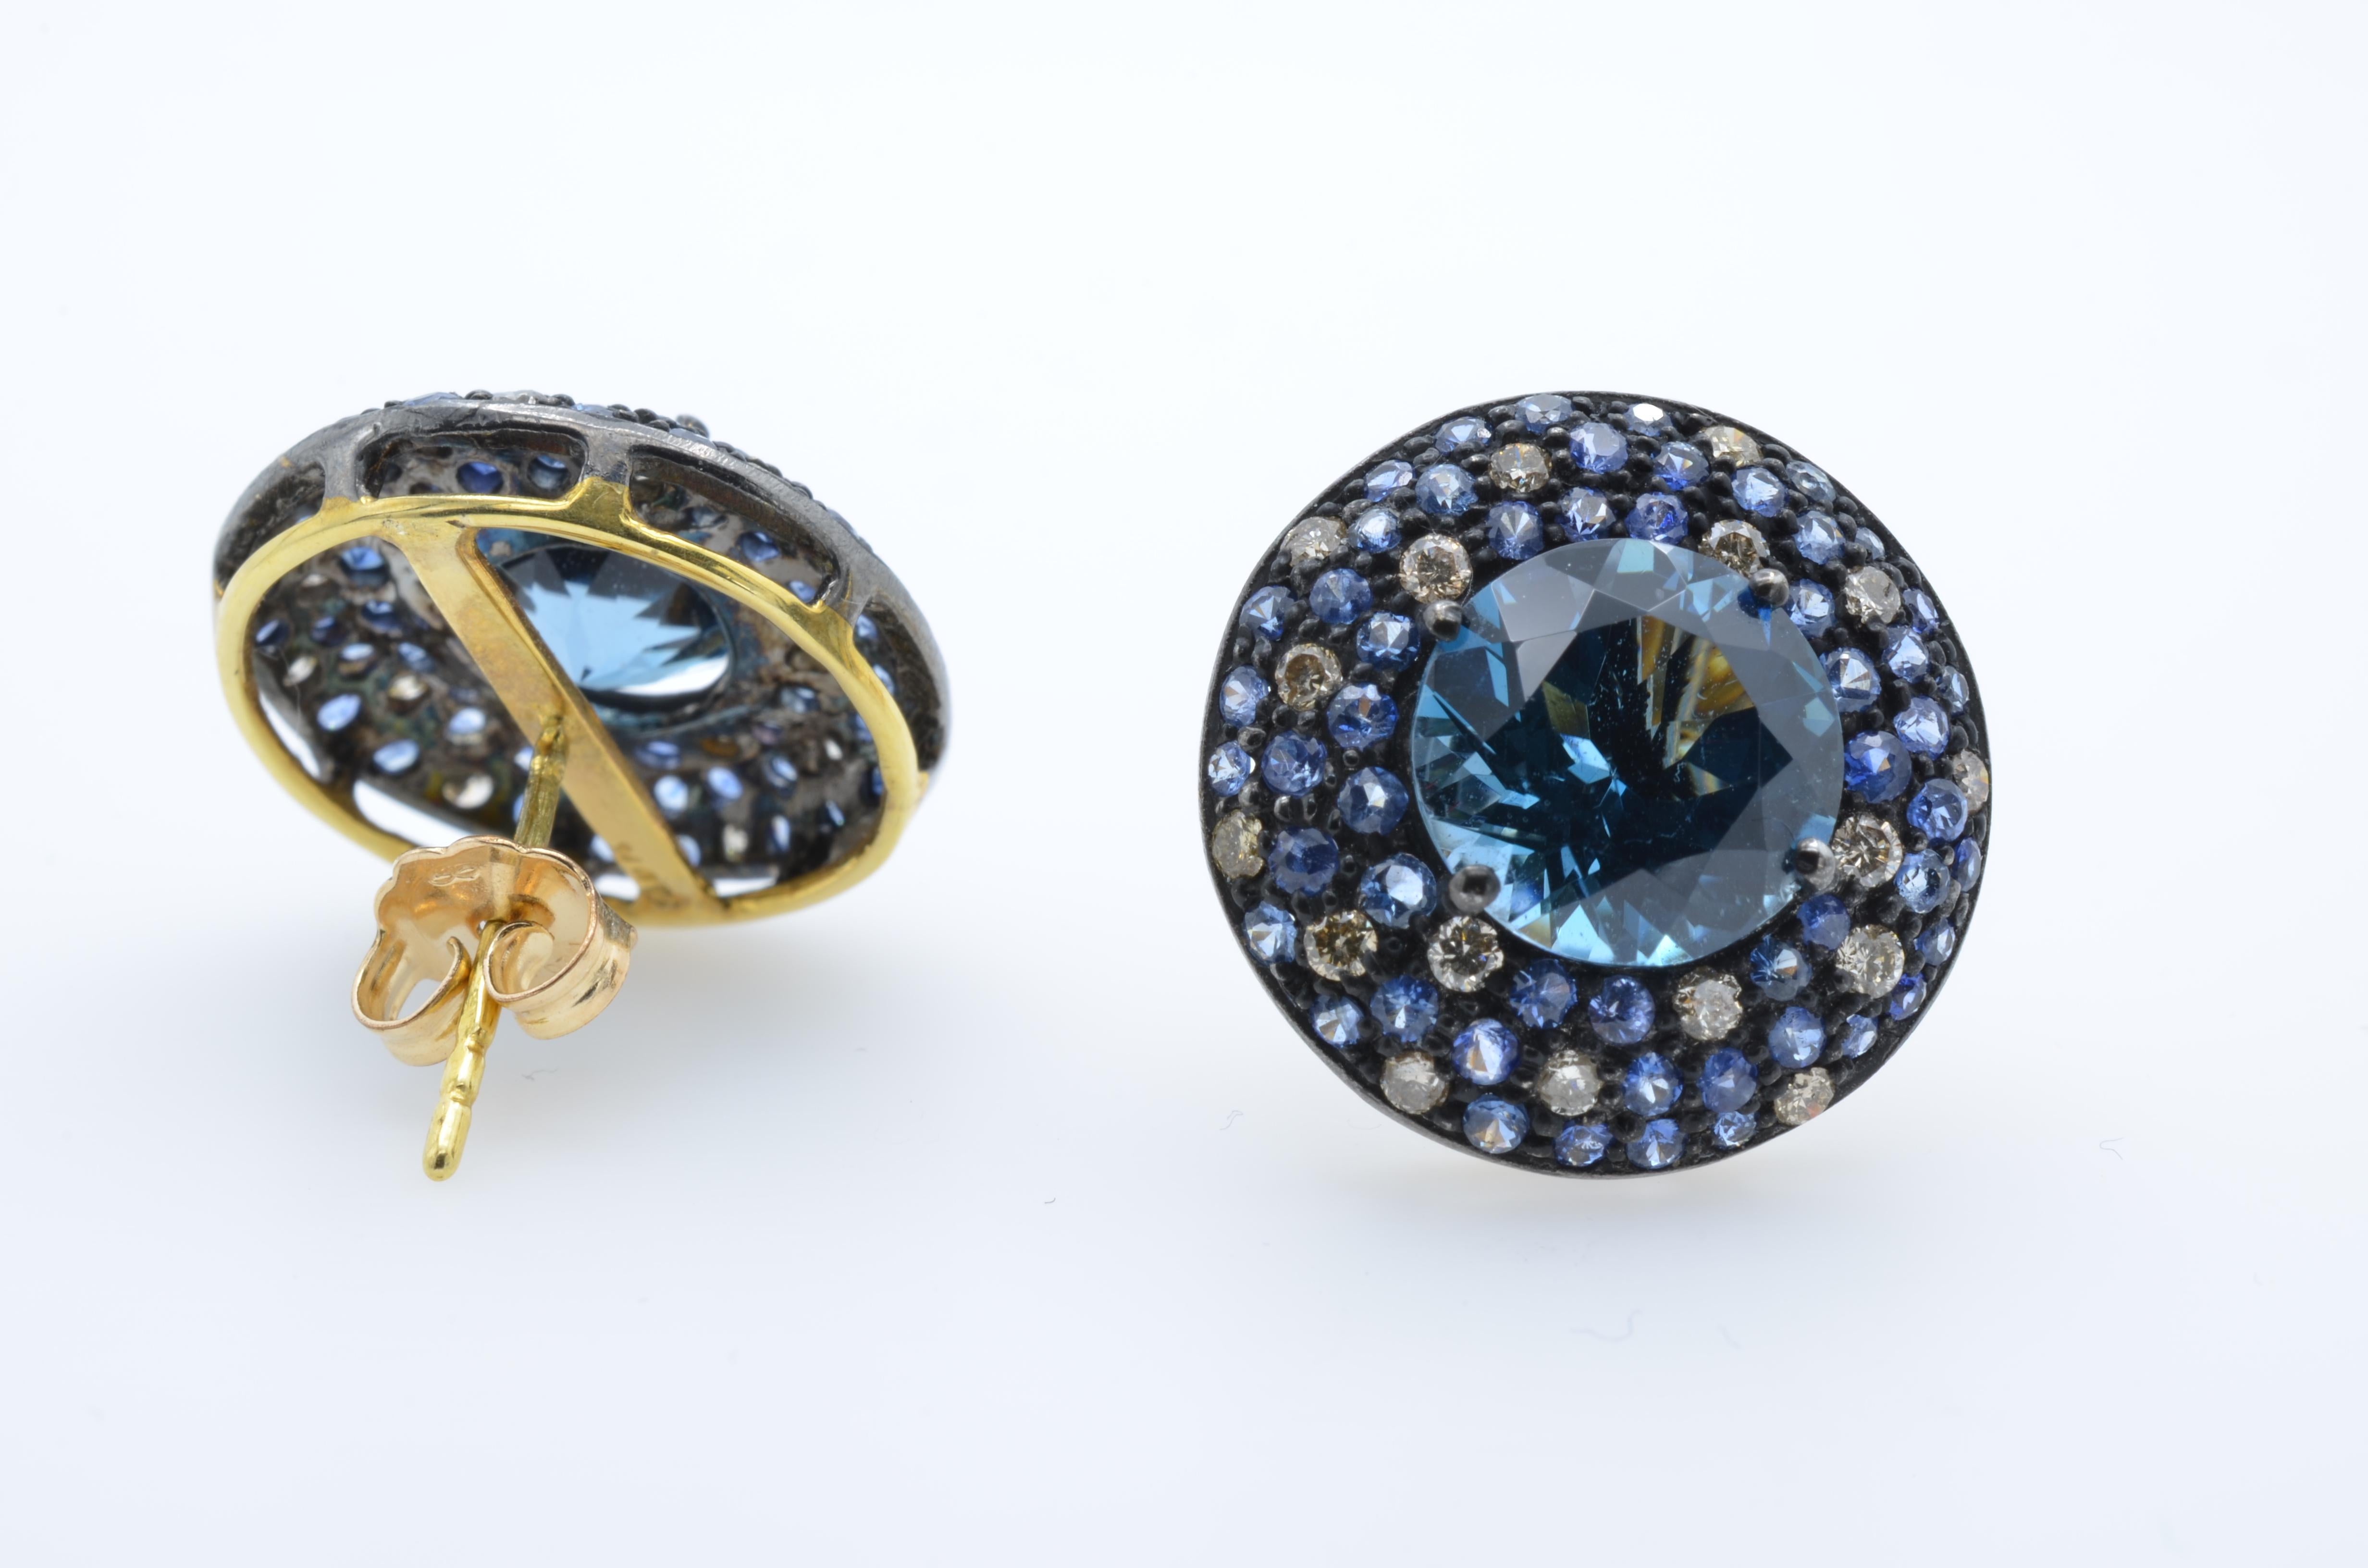 This blue kaleidoscope of jewels surrounds a deep blue topaz. The diamonds and sapphires accent the topaz in a random pattern set in oxidized sterling silver and backed in 14k gold. They are fun and fanciful and full of dazzle!!